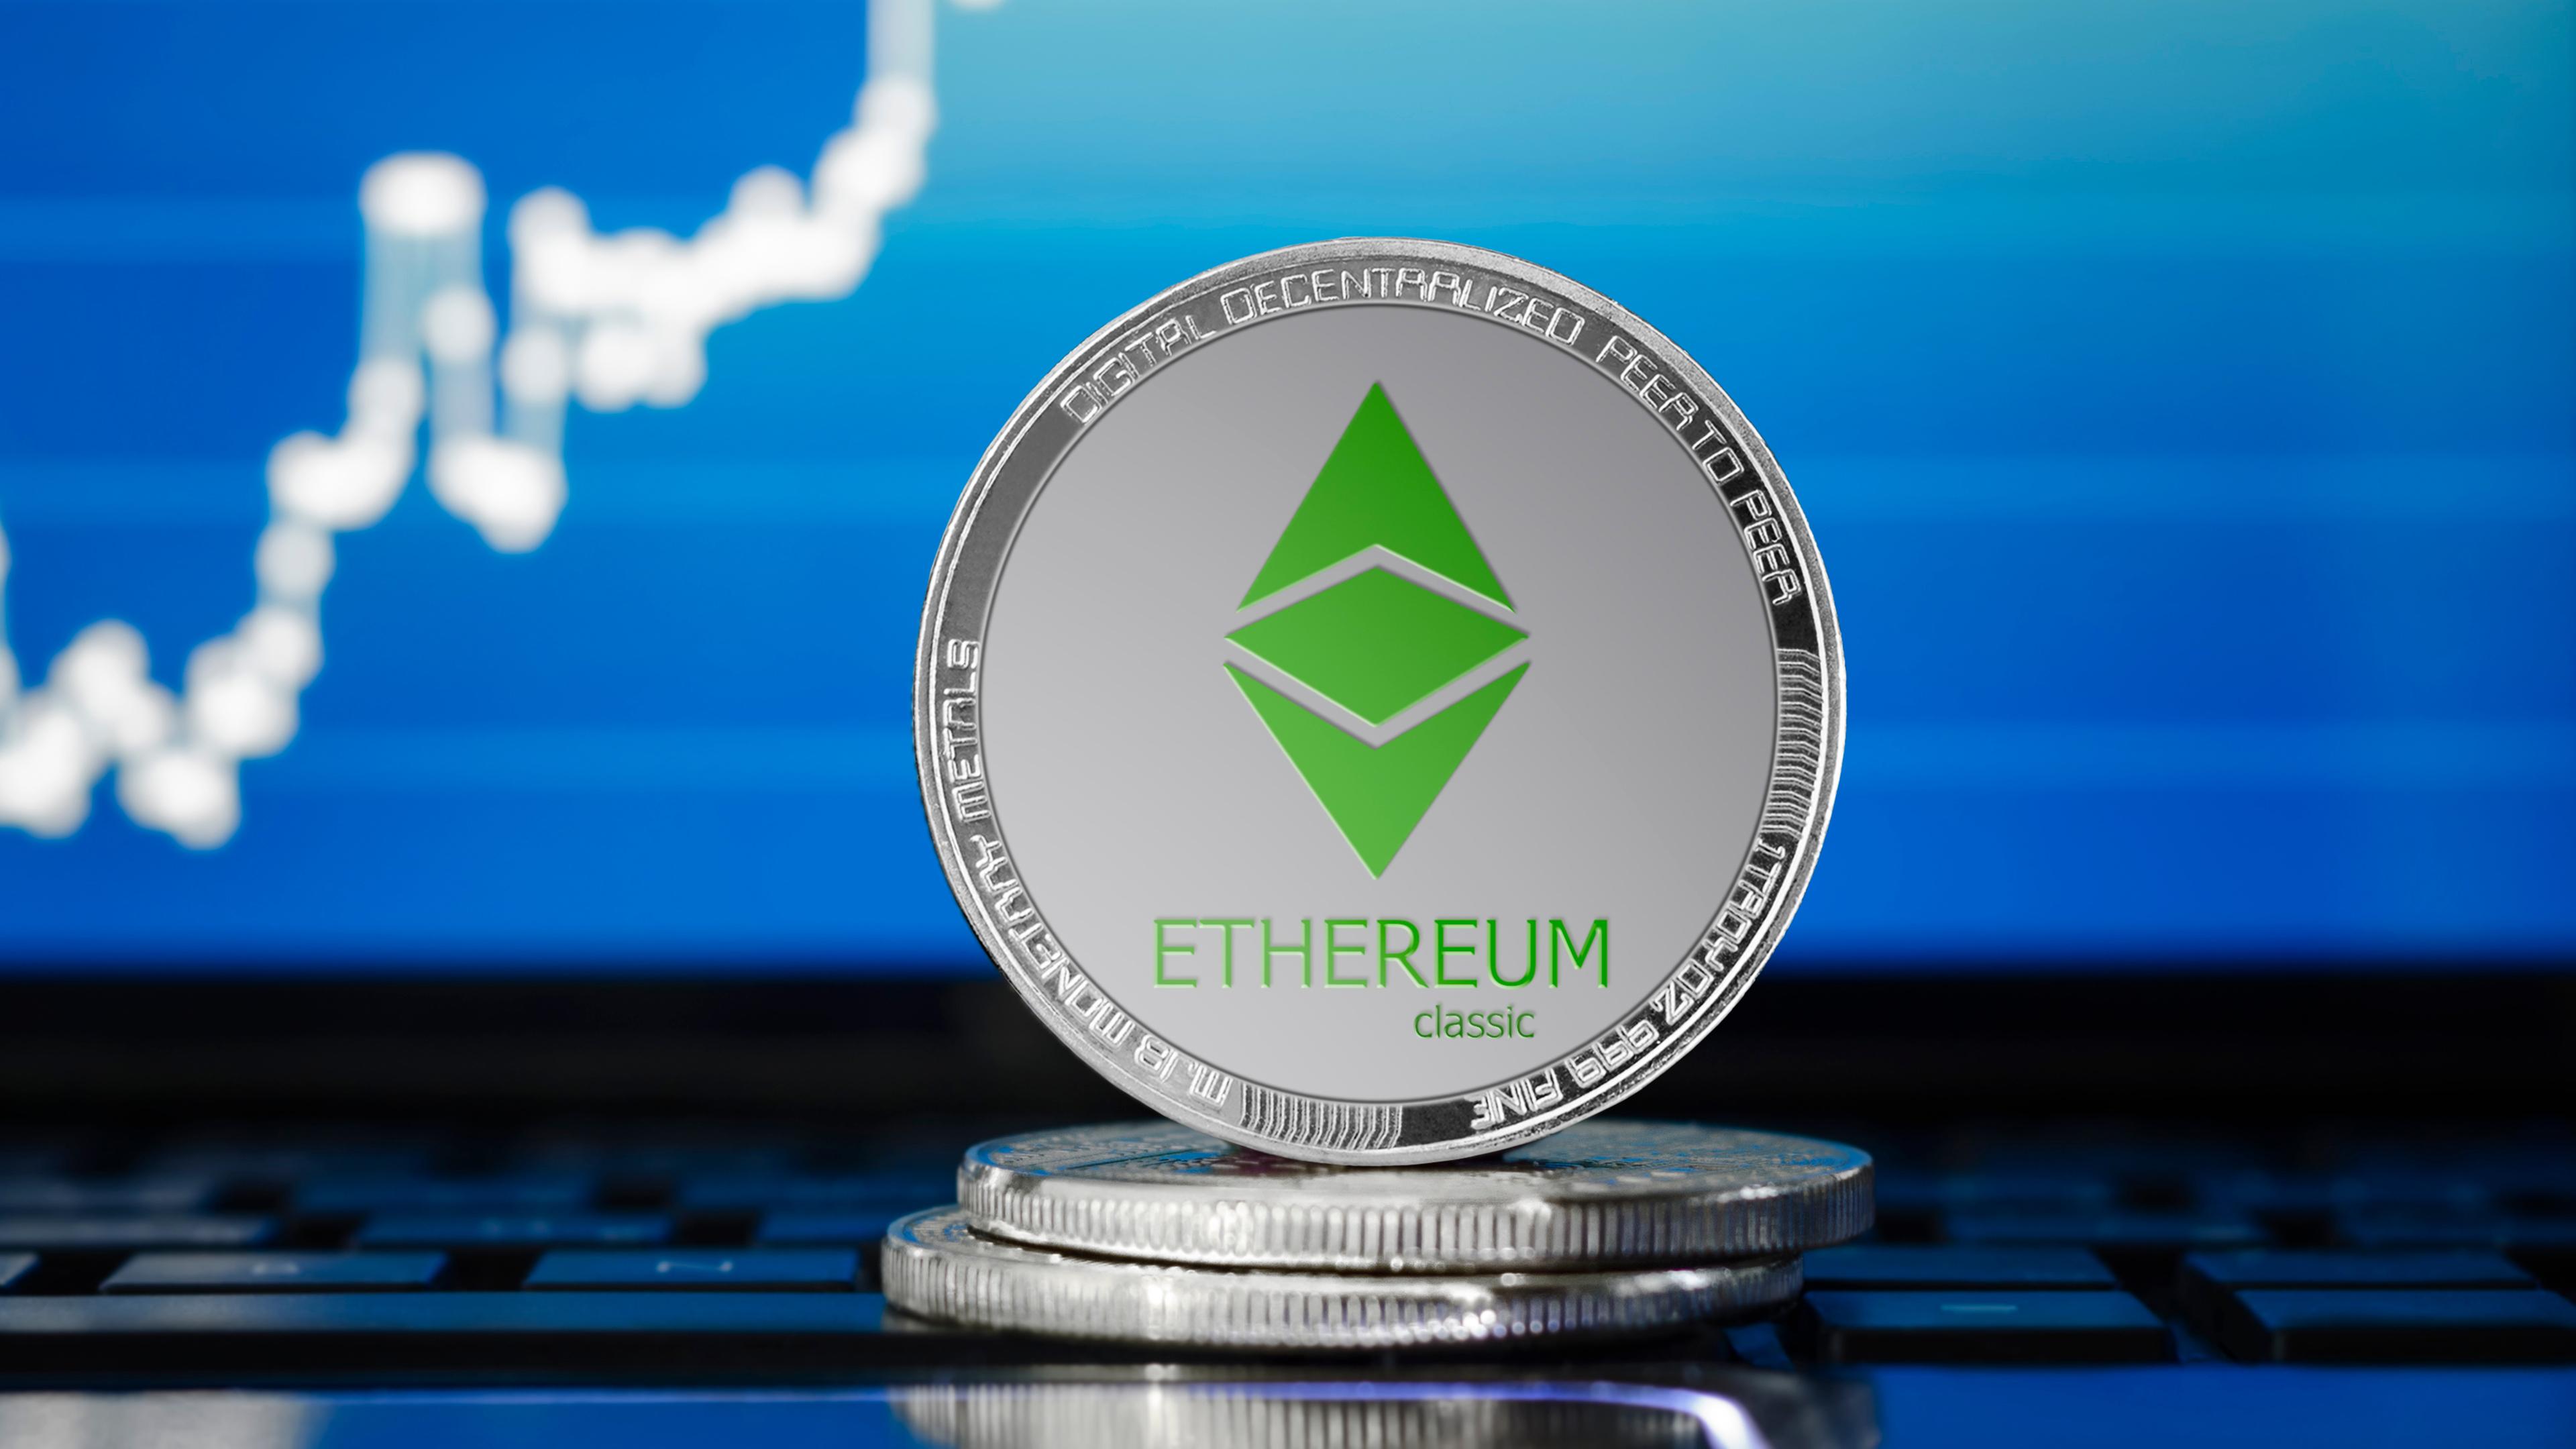 Top cryptocurrency by value — Ethereum Classic